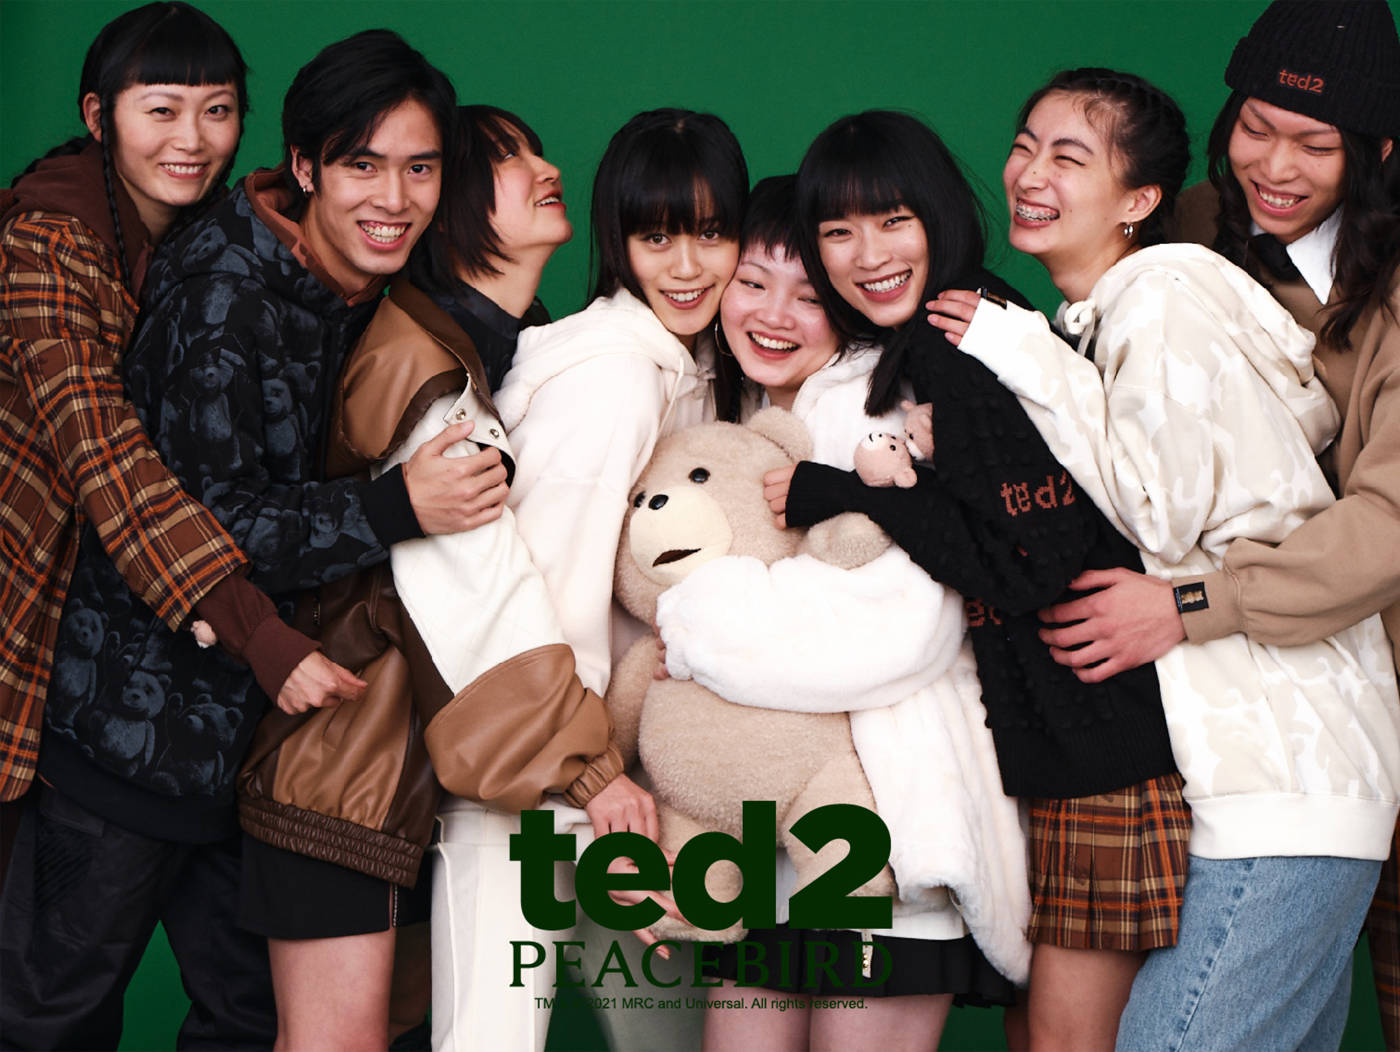 Ted 2 x Peacebird apparel collection